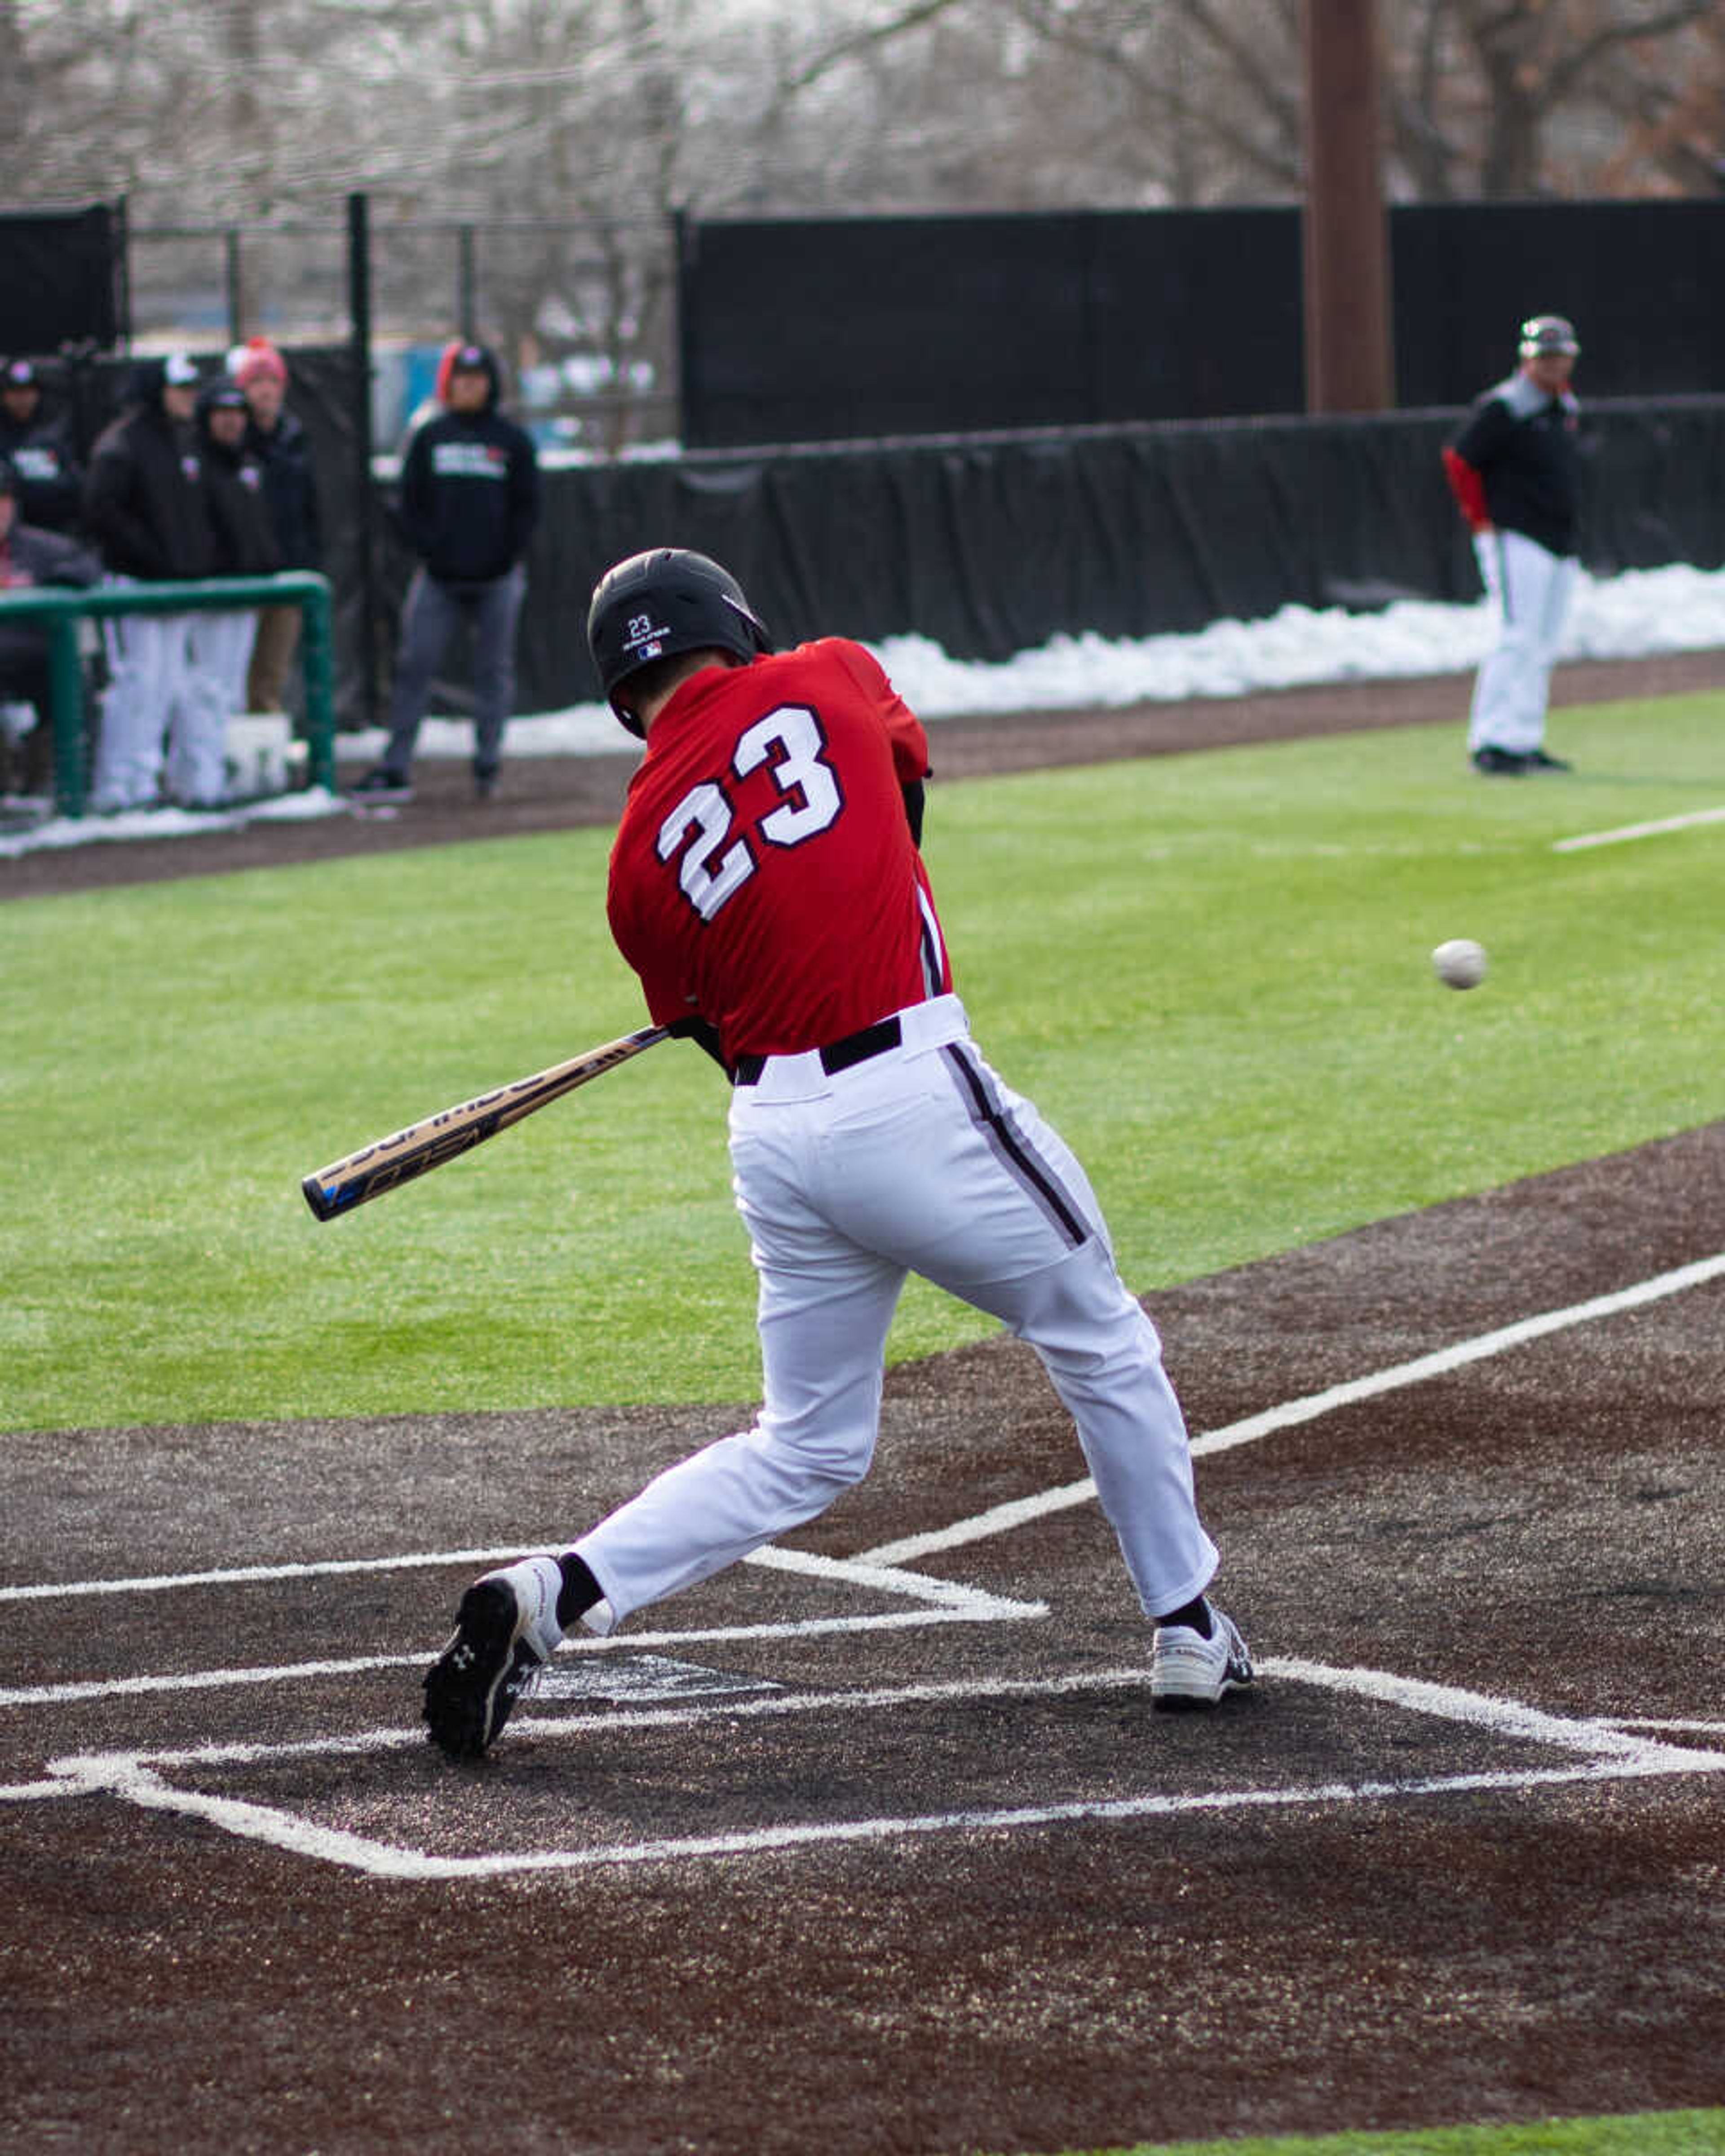 Senior outfielder Justin Dirden looks to make contact on a pitch in a win over Western Michigan Feb. 16